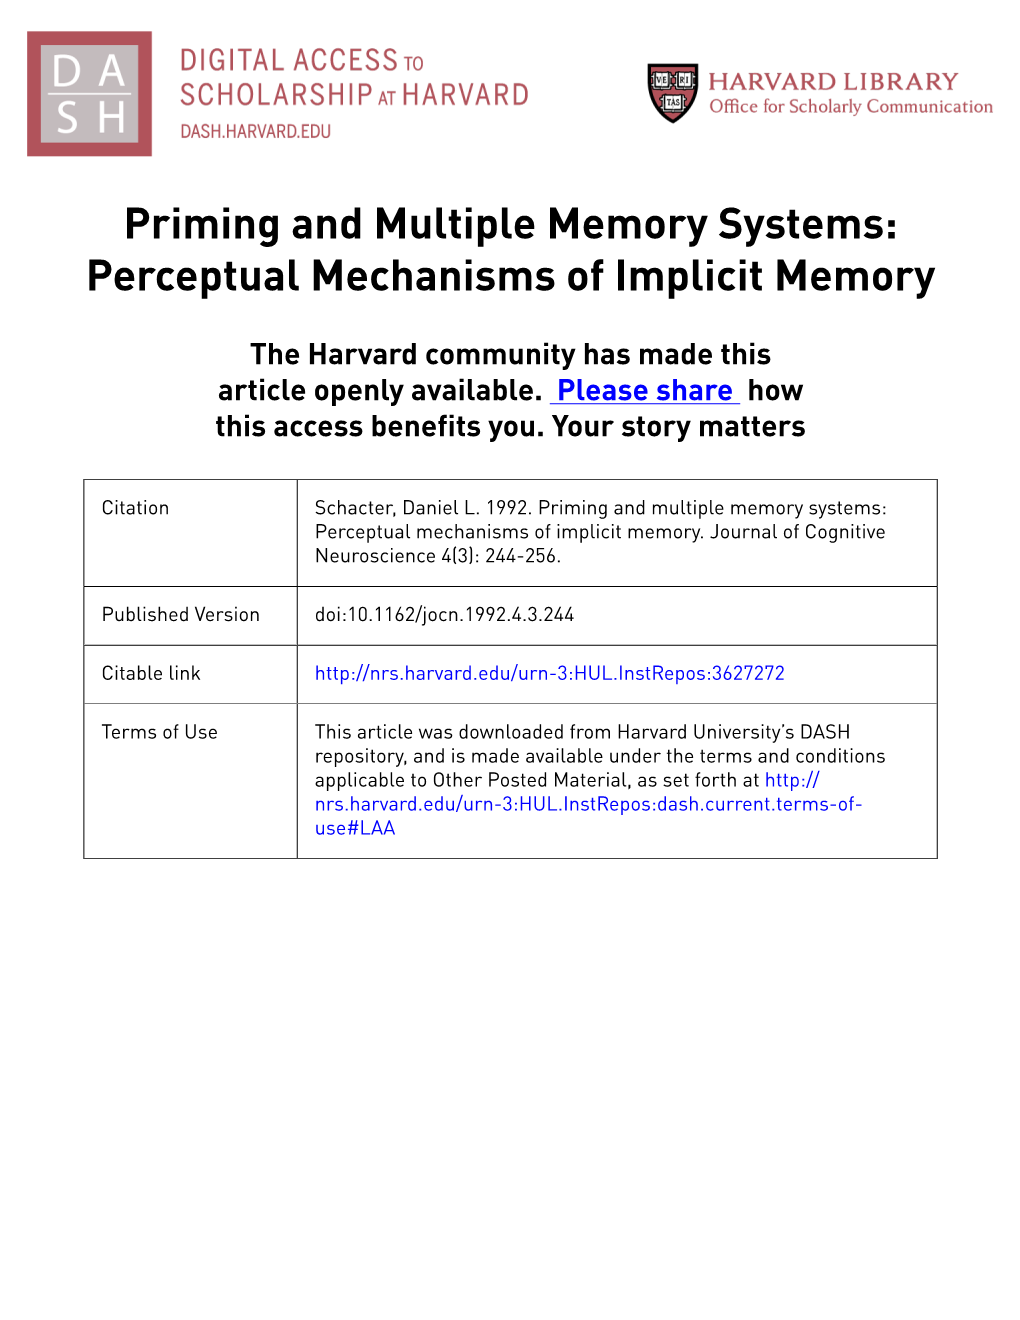 Priming and Multiple Memory Systems: Perceptual Mechanisms of Implicit Memory